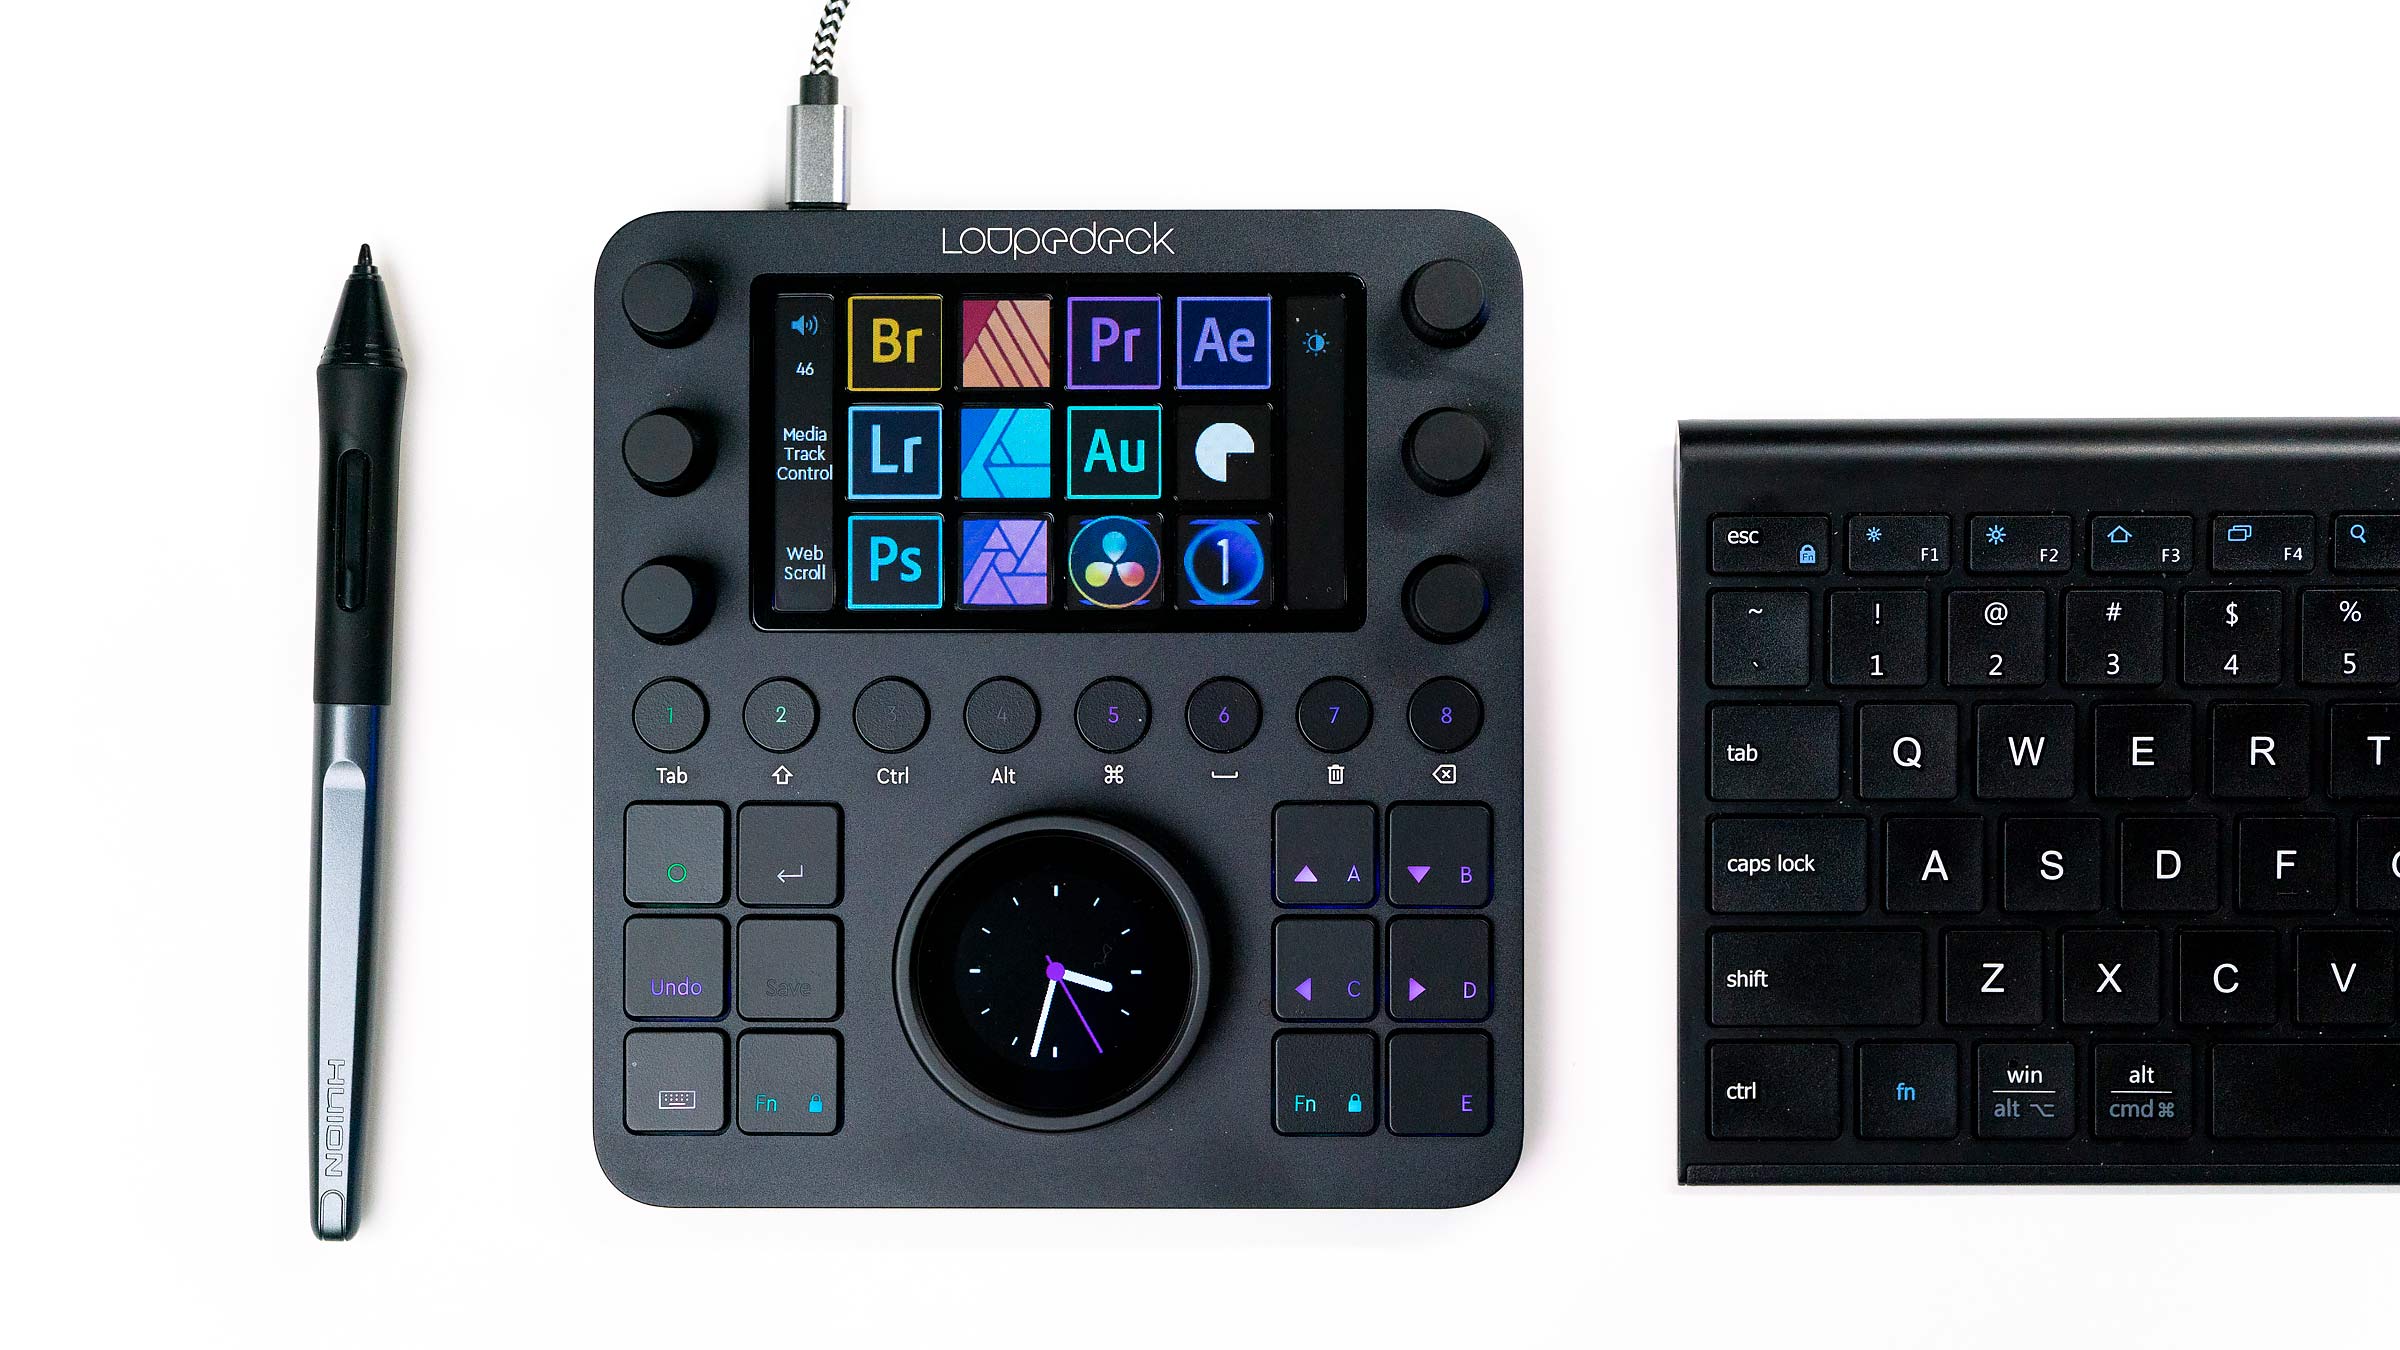 Loupedeck Review: This Keyboard Designed for Editing Photos Is All Thumbs